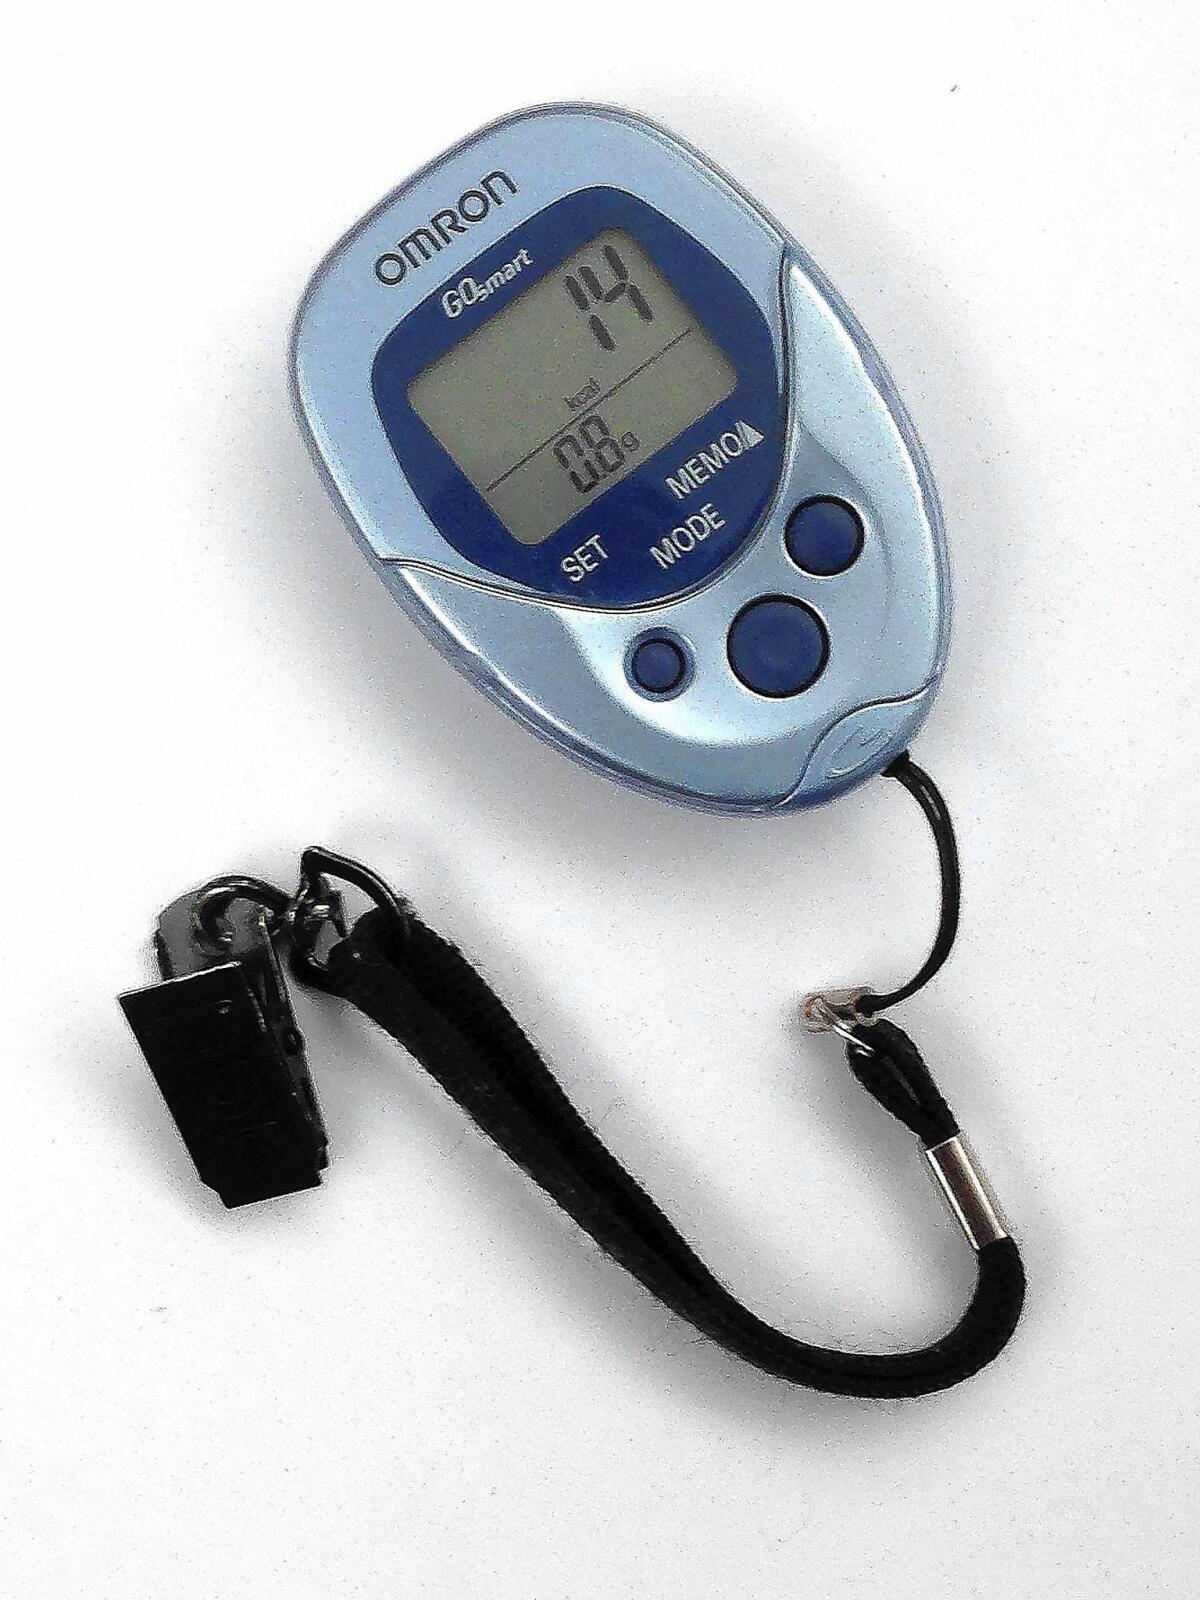 The Omron HJ-112 model is a simple pedometer that costs about $28.